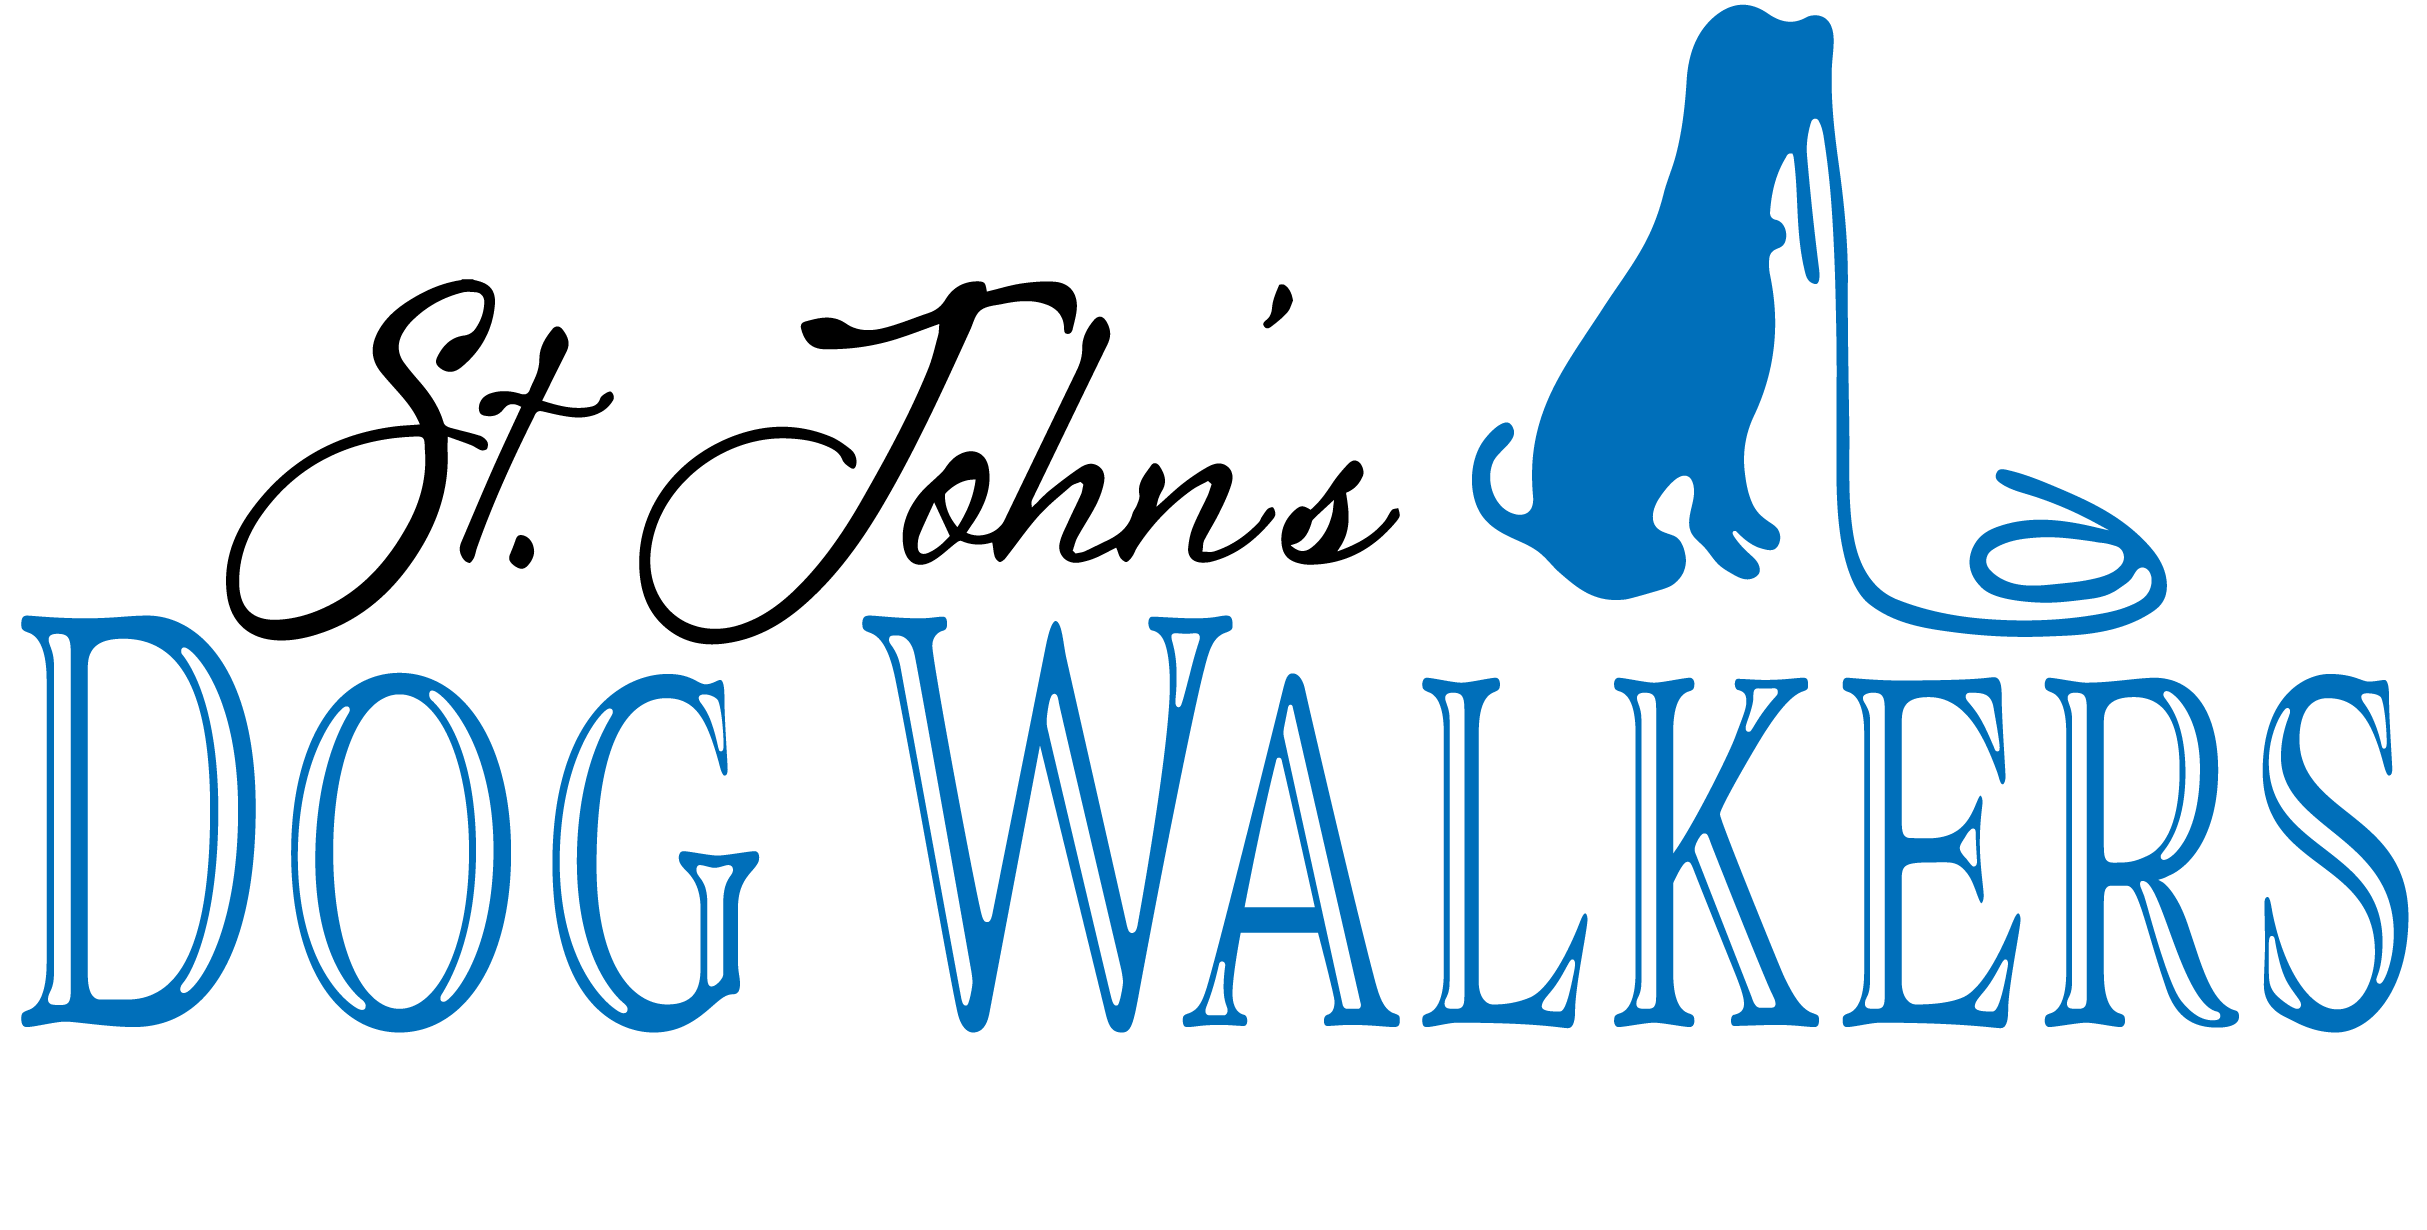 St. John's Dog Walkers LOGO. Be on the look out for the very best dog walkers in Nocatee, FL.